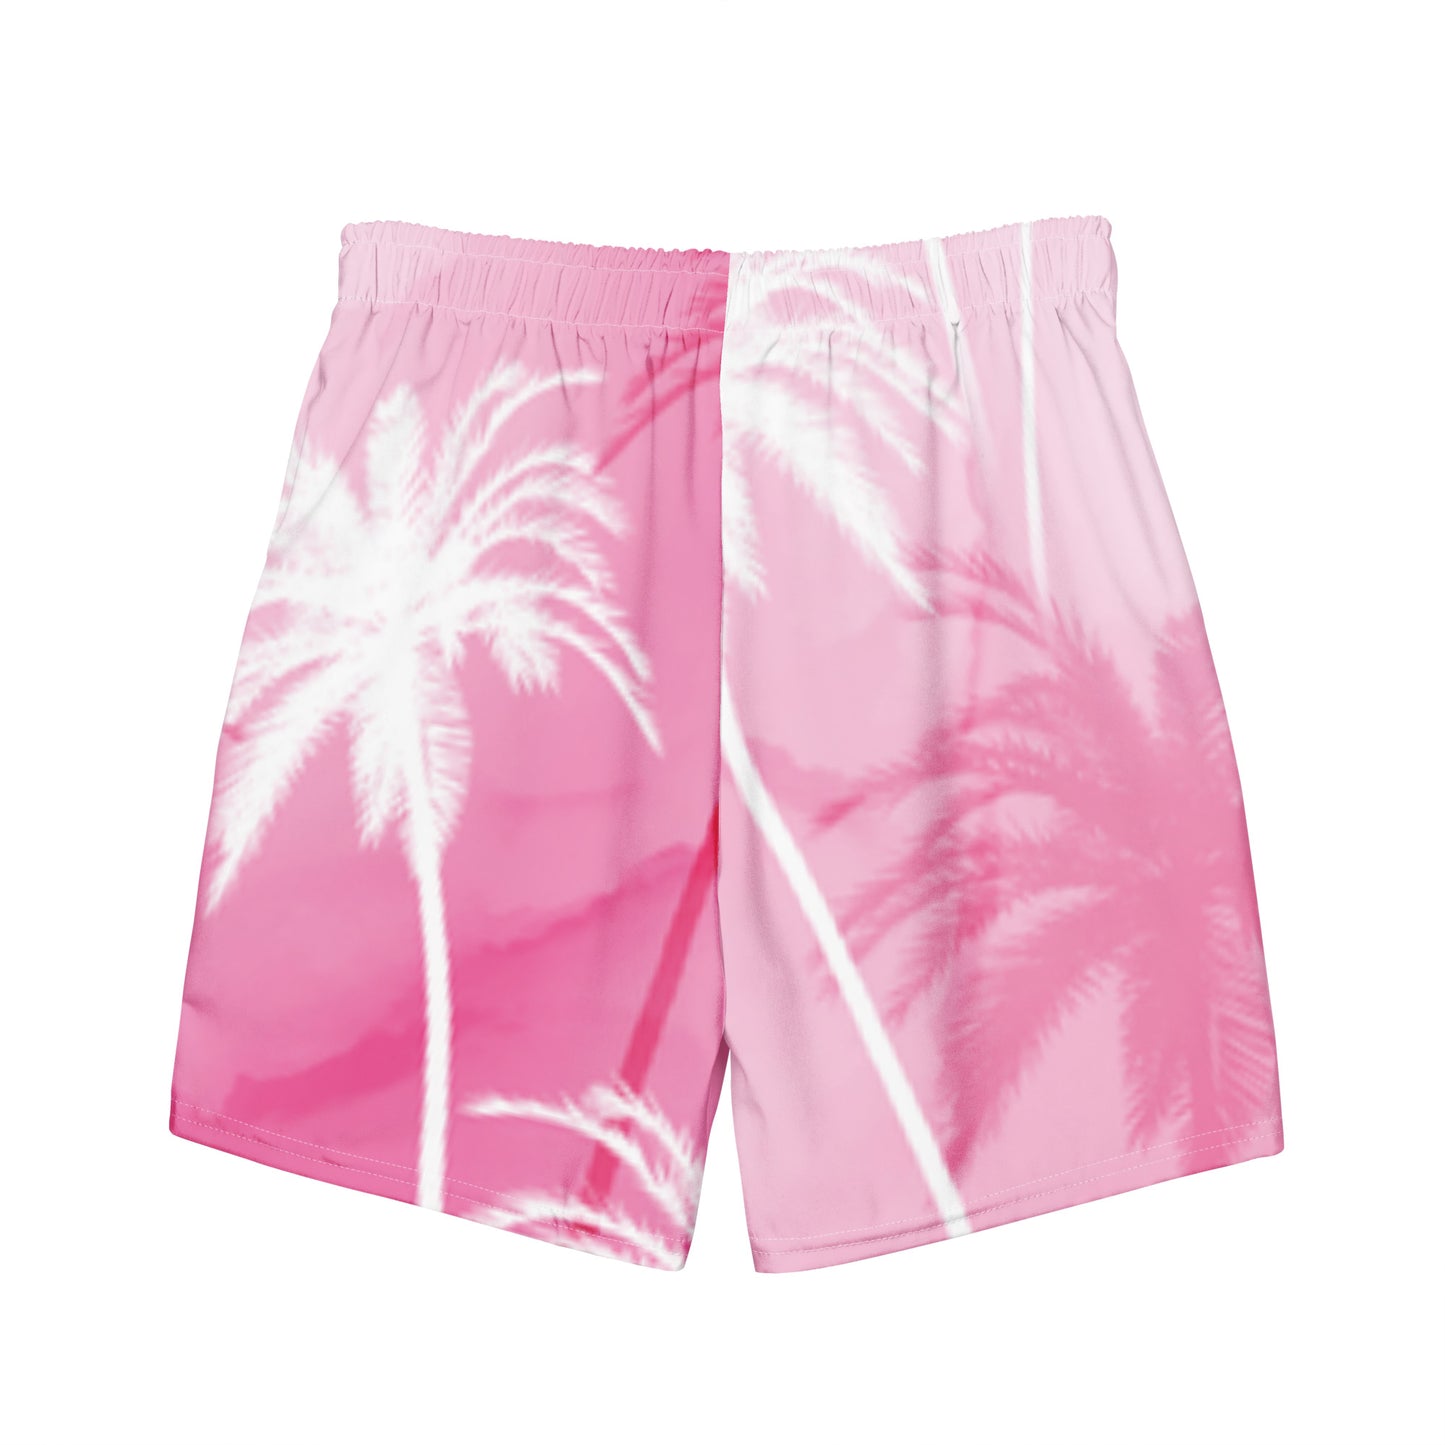 All-Over Print Recycled Swim Shorts: Pink & Palm Trees